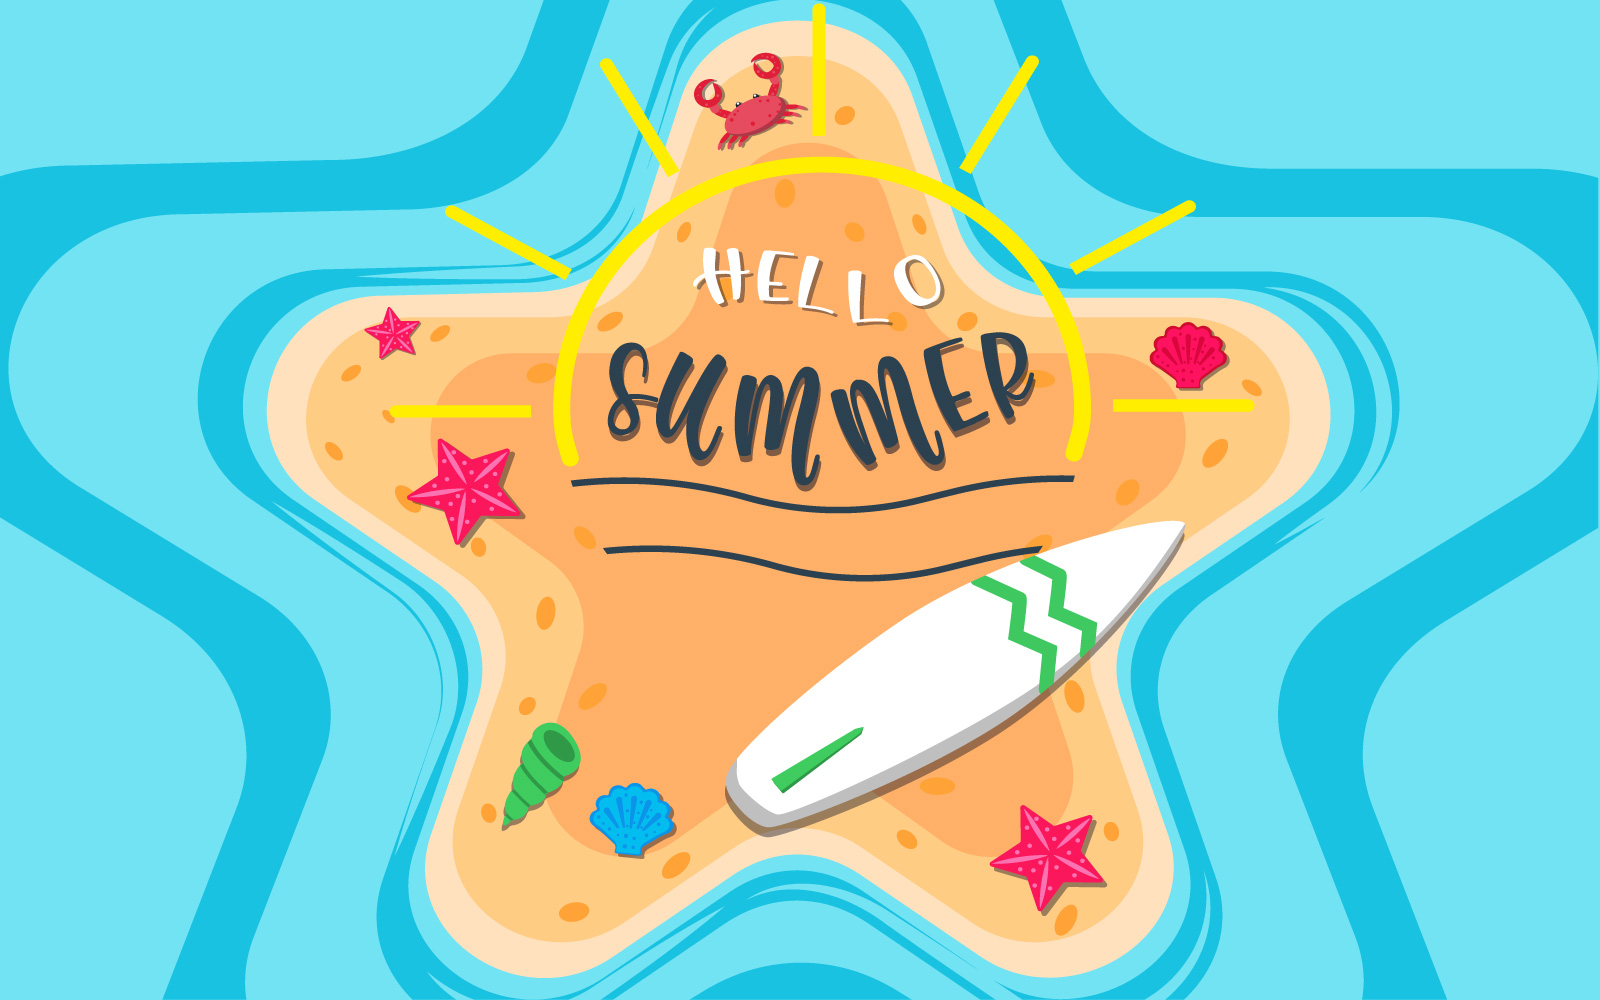 An island in the shape of a starfish - Hello Summer - Beach Summer Background Illustration.